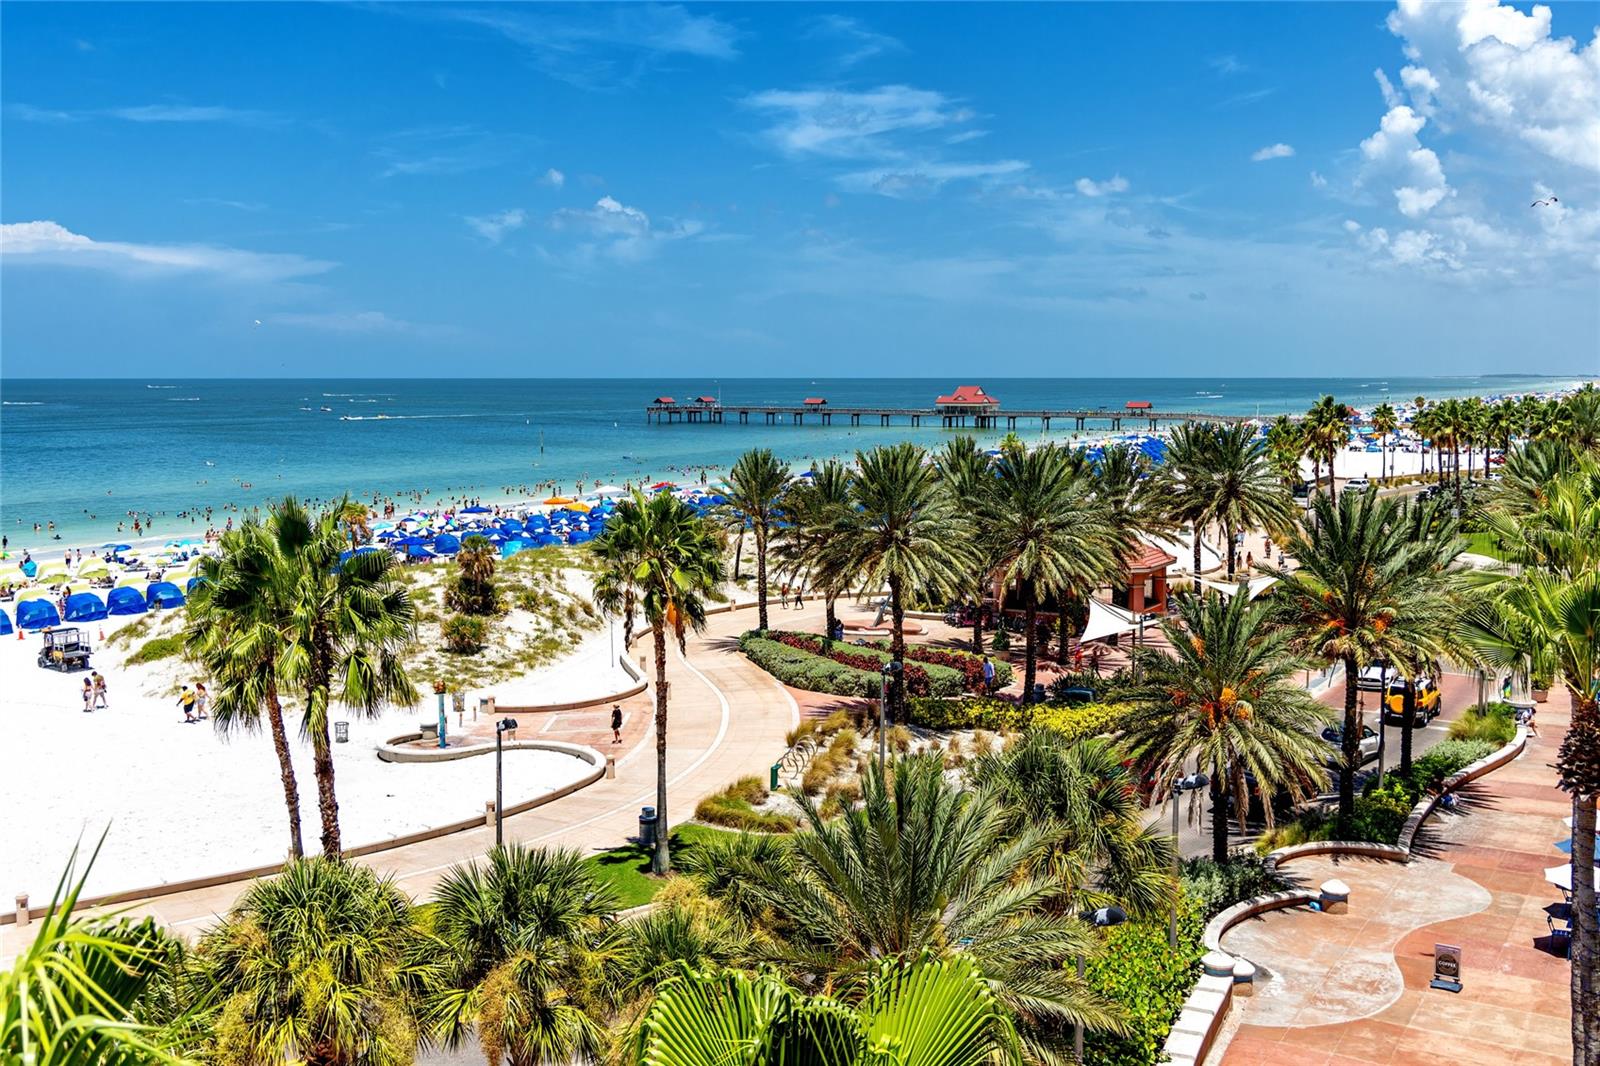 Clearwater Beach is close by